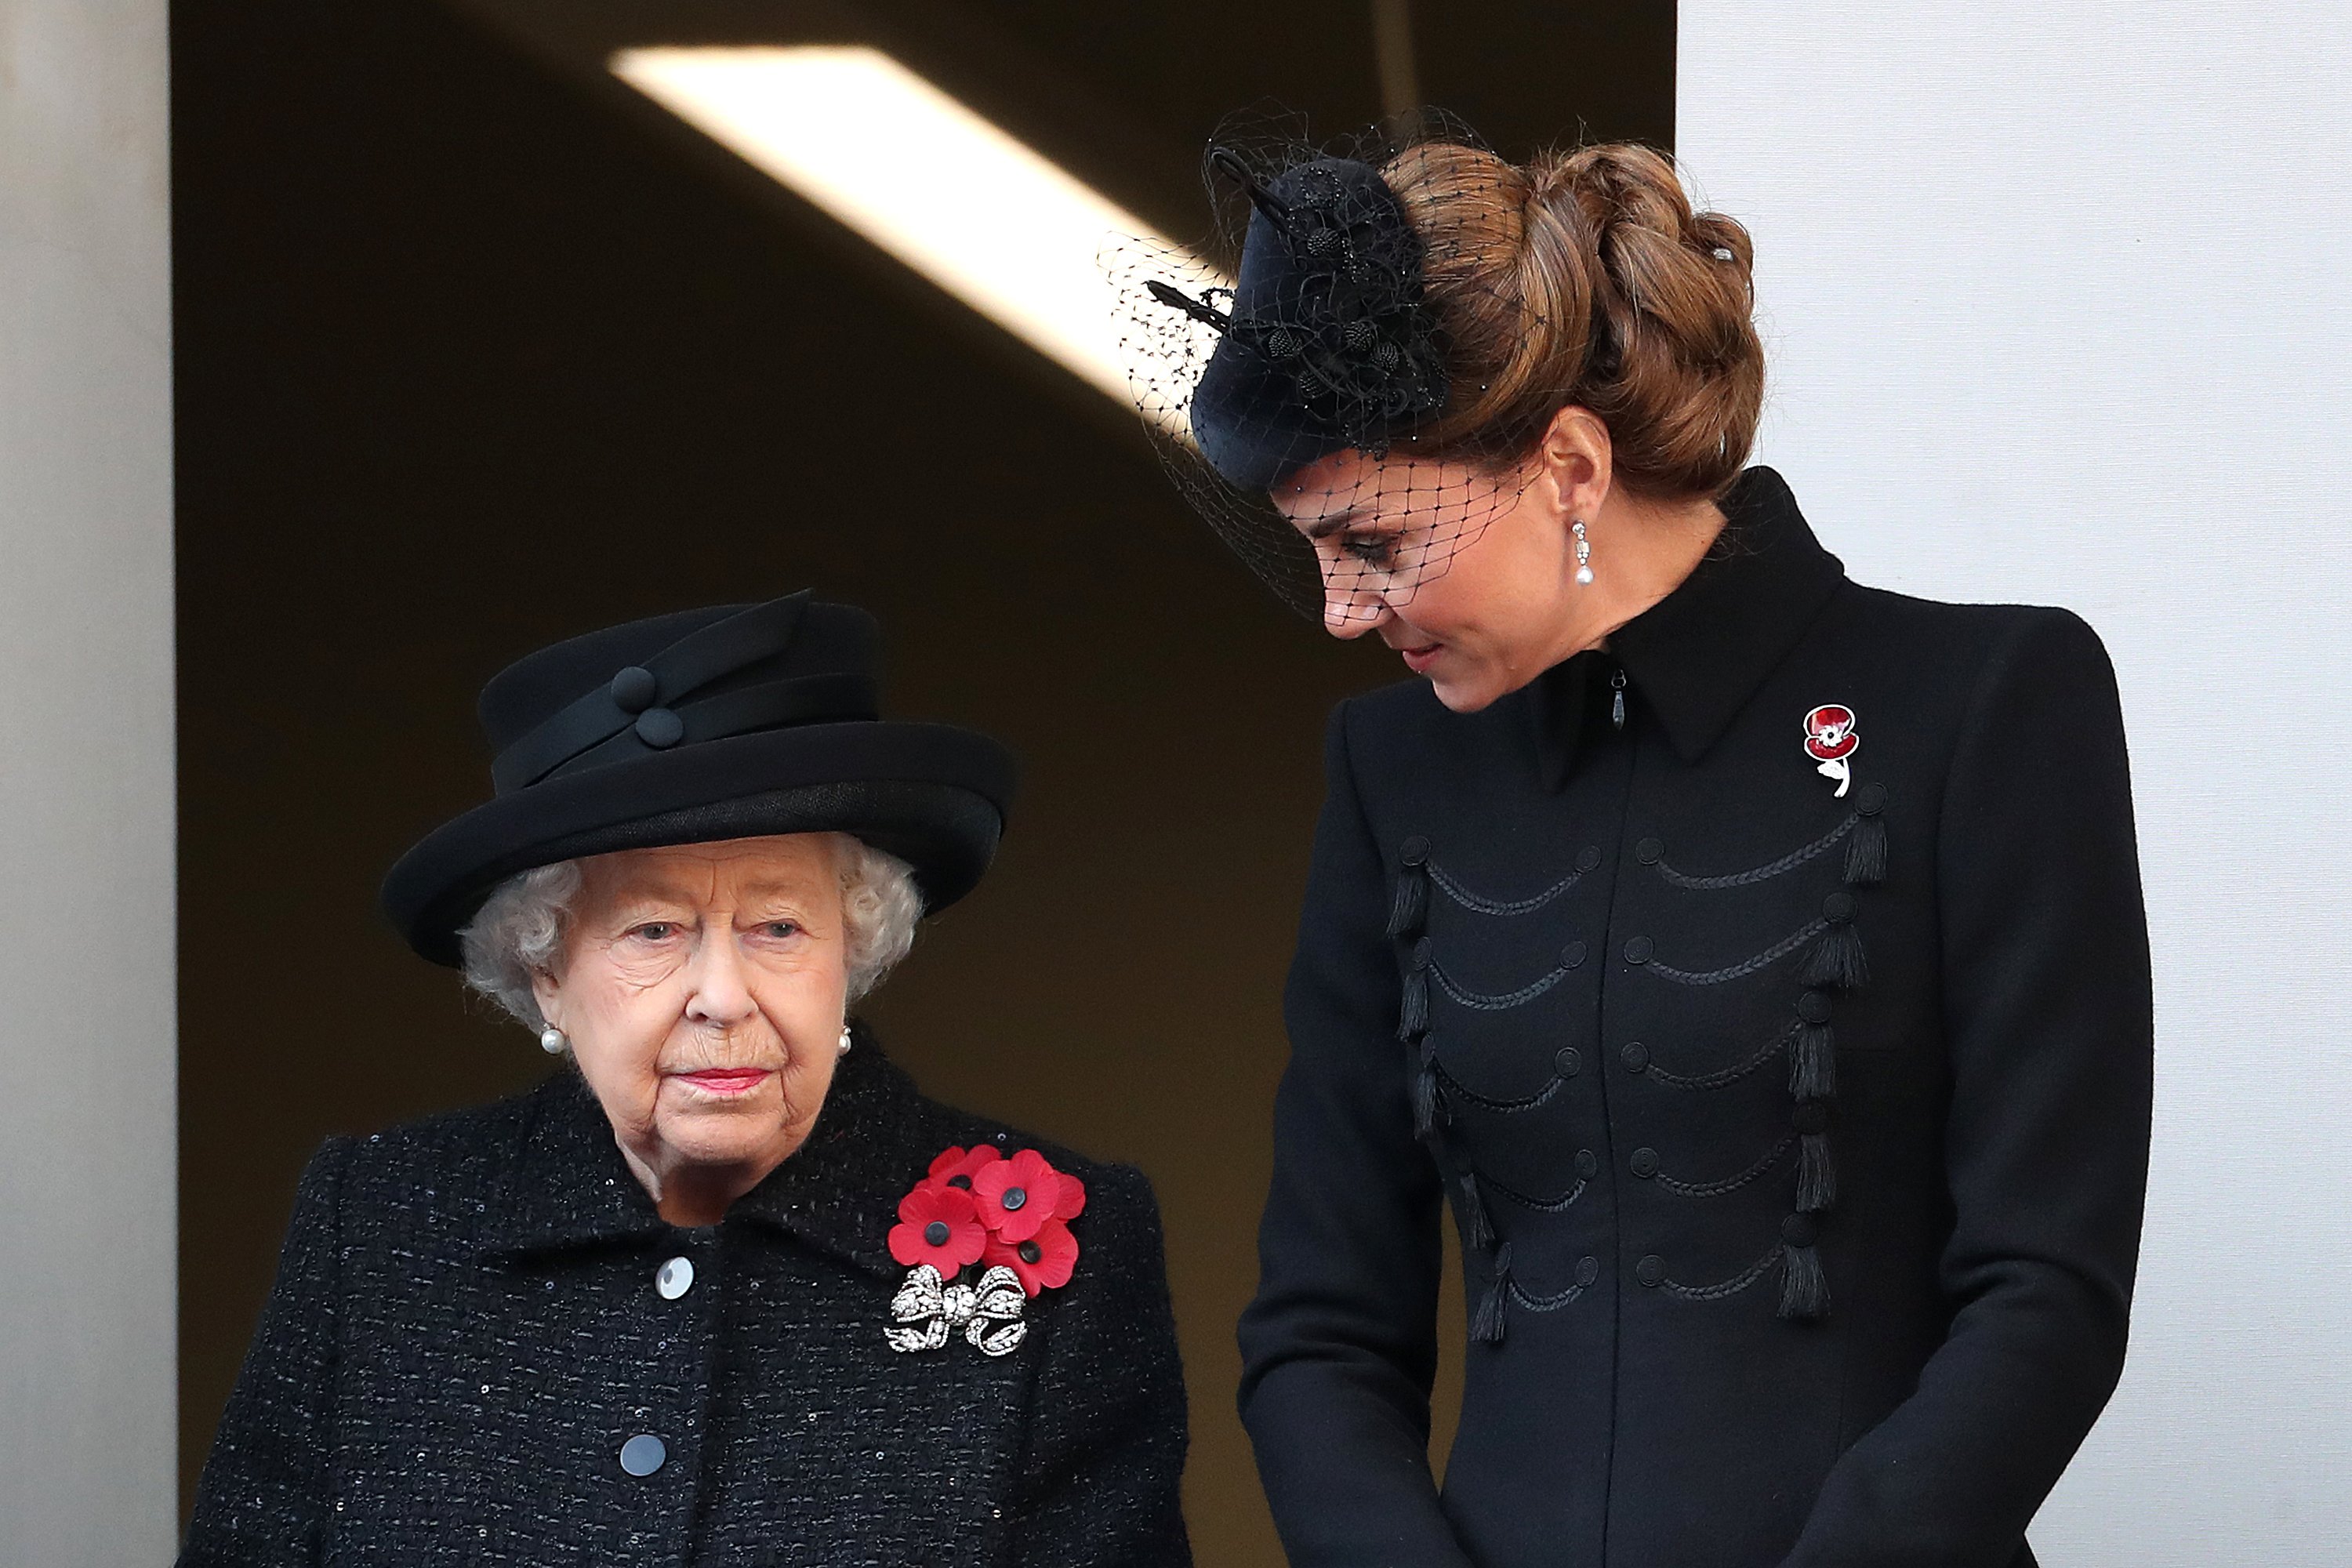 Queen Elizabeth II and Catherine, Duchess of Cambridge at the annual Remembrance Sunday memorial at The Cenotaph on November 10, 2019 in London, England. | Source: Getty Images